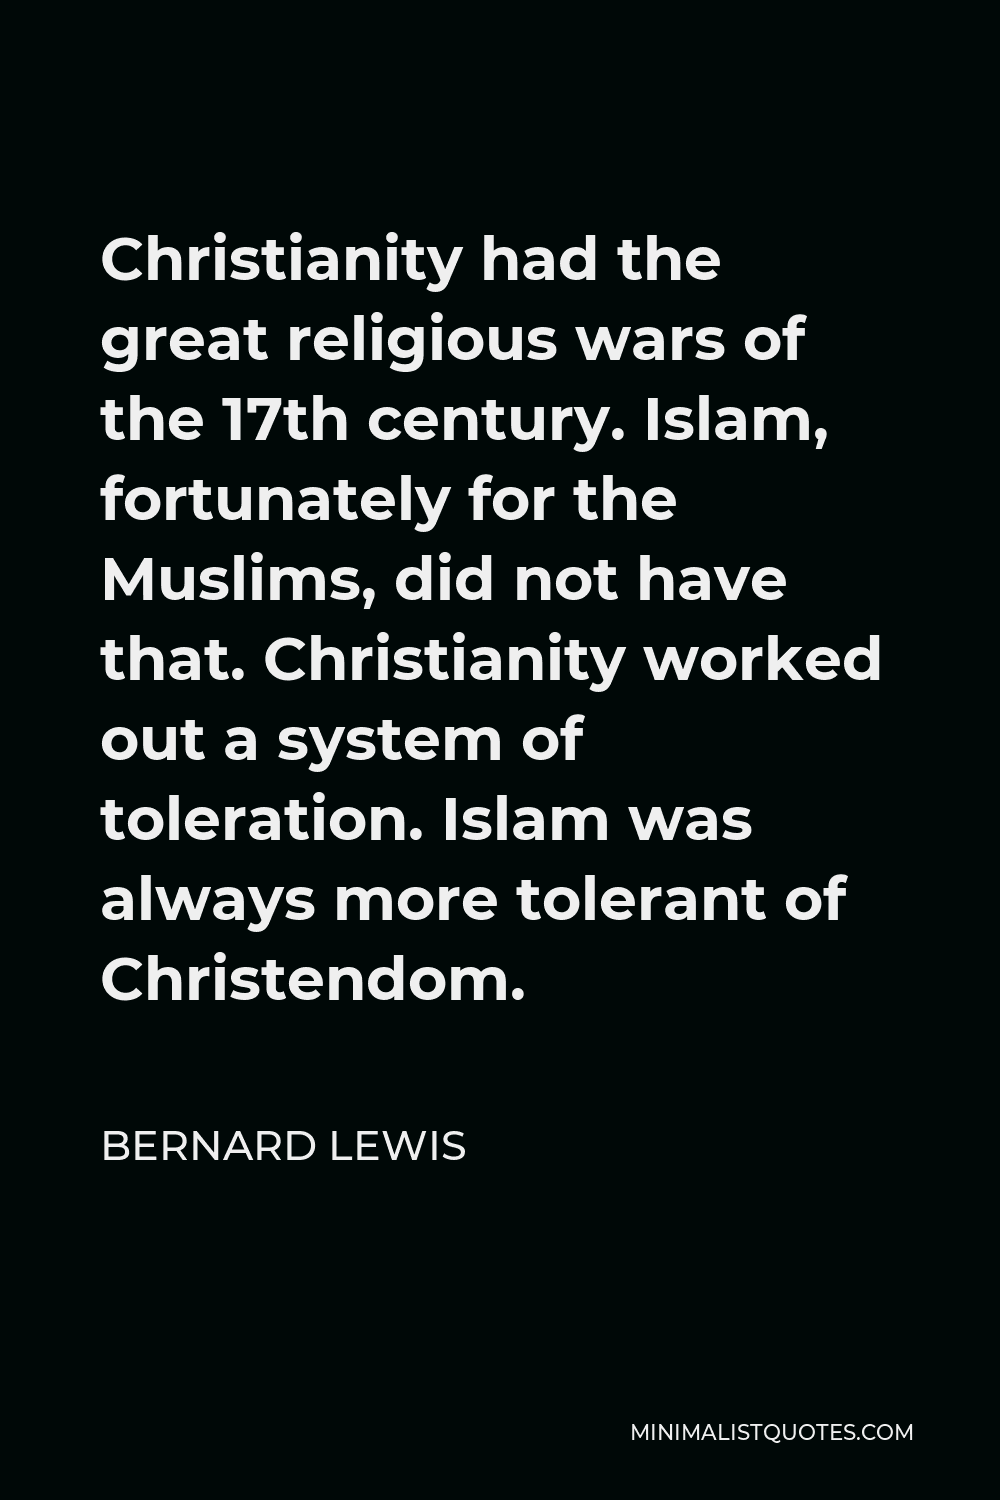 Bernard Lewis Quote - Christianity had the great religious wars of the 17th century. Islam, fortunately for the Muslims, did not have that. Christianity worked out a system of toleration. Islam was always more tolerant of Christendom.